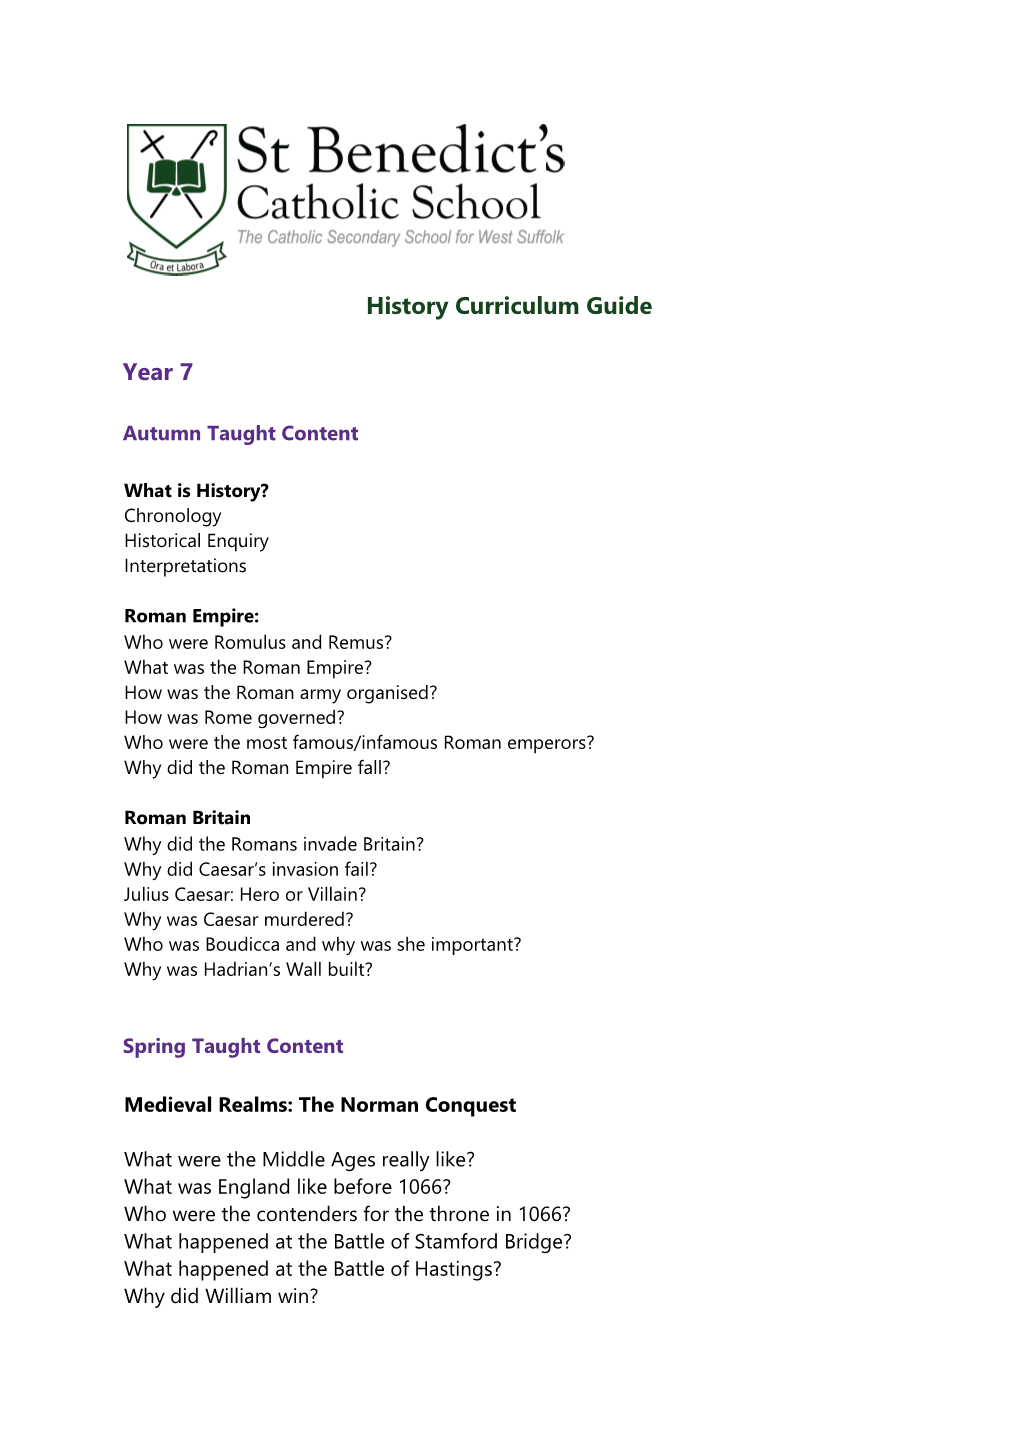 Download History Curriculum Guide